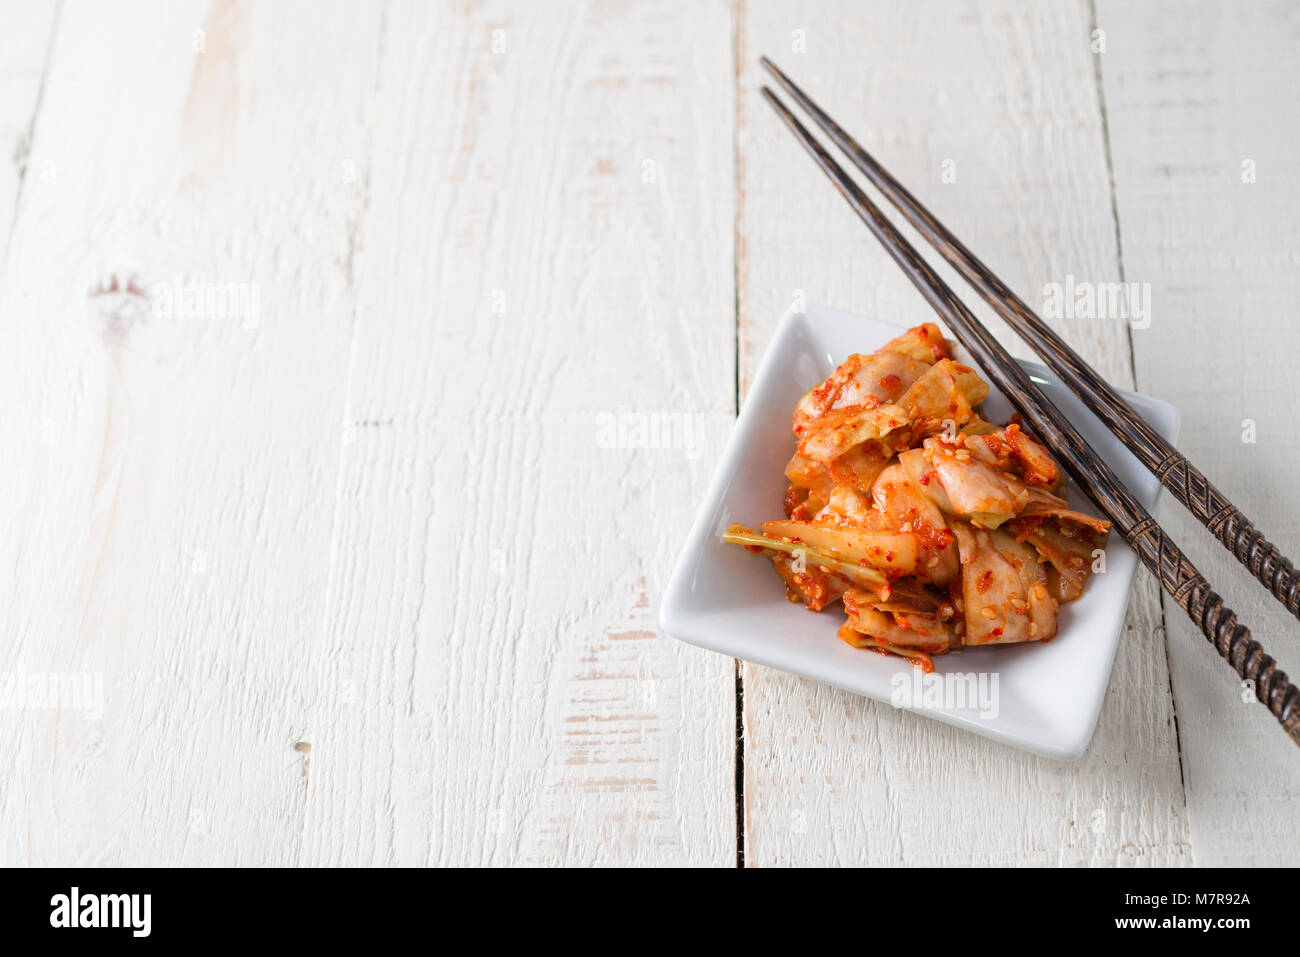 Korean kimchi - a fermented, spiced cabbage pickle. Stock Photo